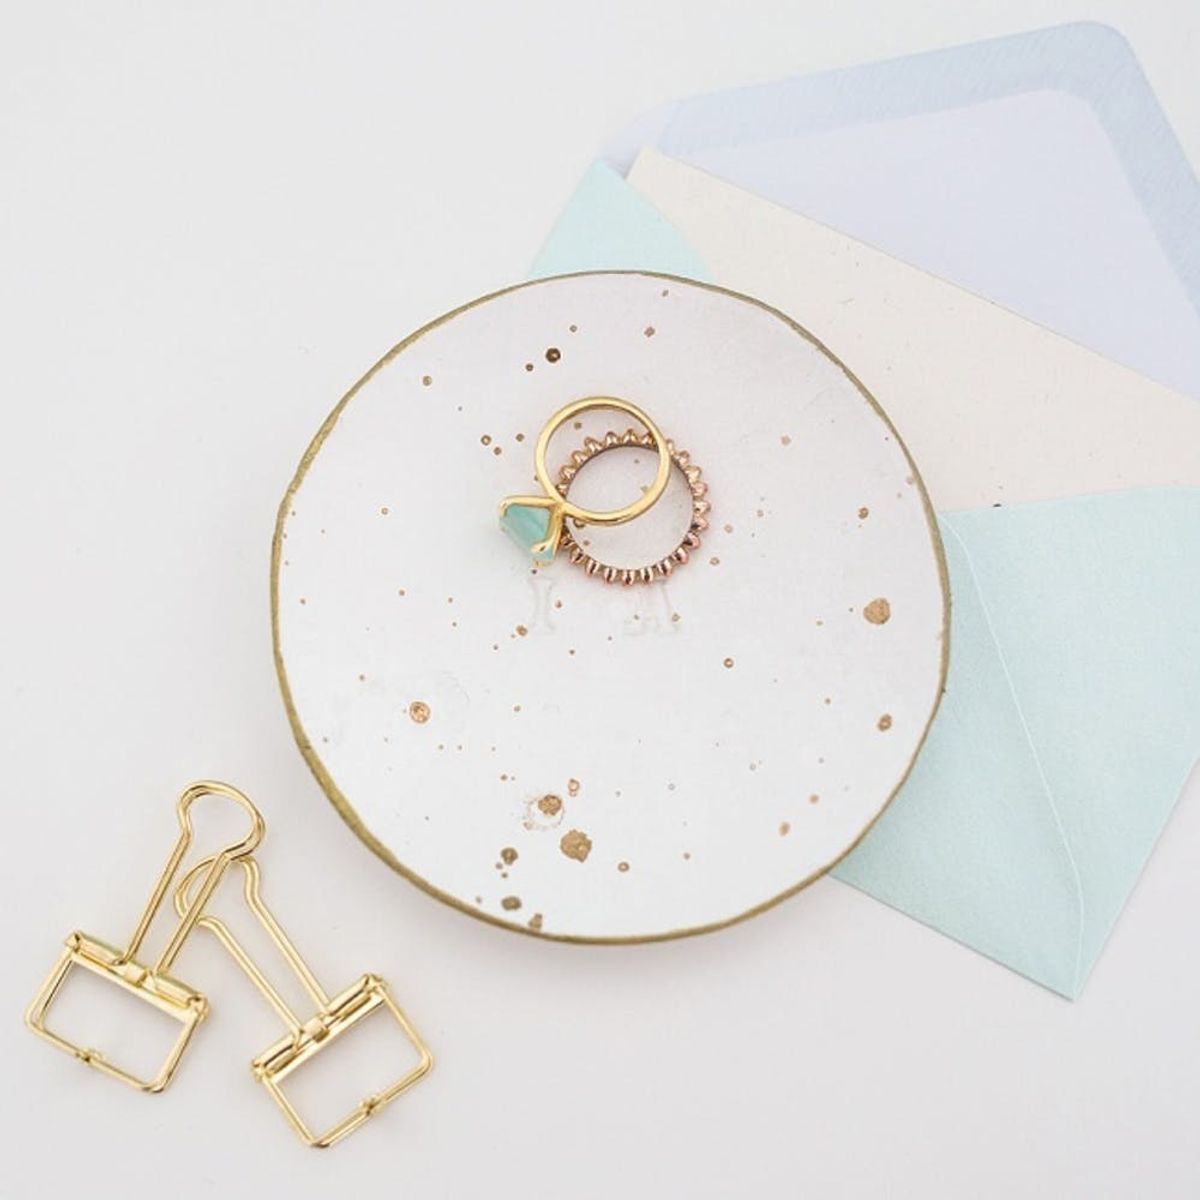 DIY a Monogrammed Ring Dish to Add a Personal Touch to Your Wedding